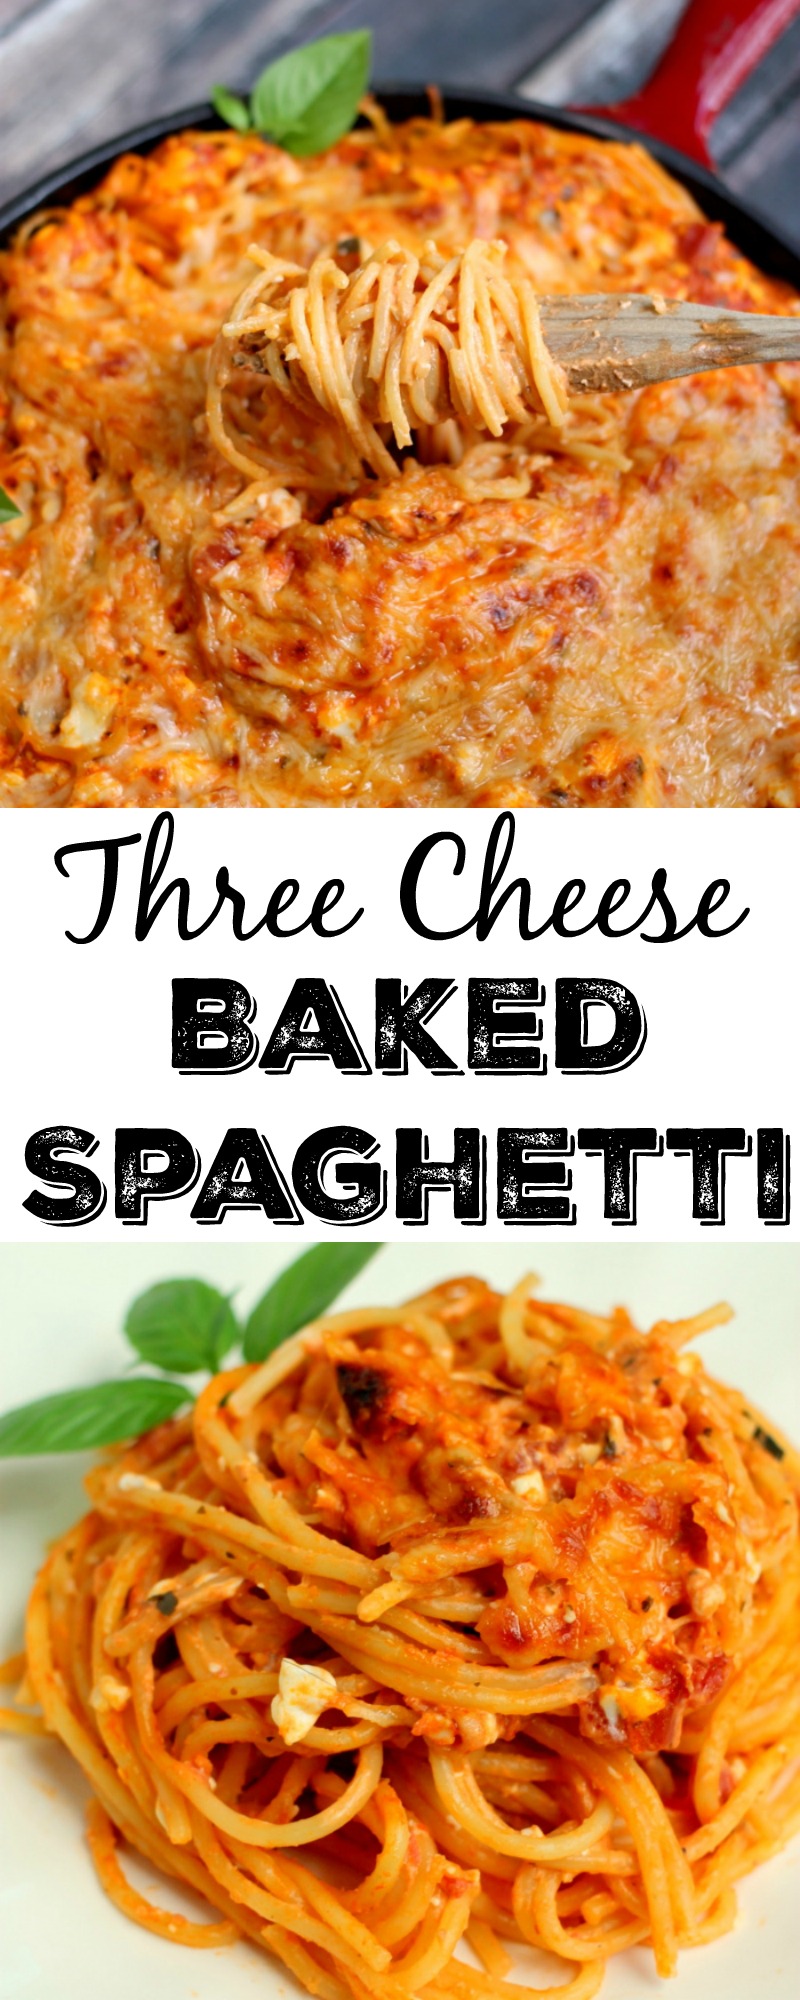 This three cheese baked spaghetti is the best pasta dish I have ever made. It is our potluck favorite.